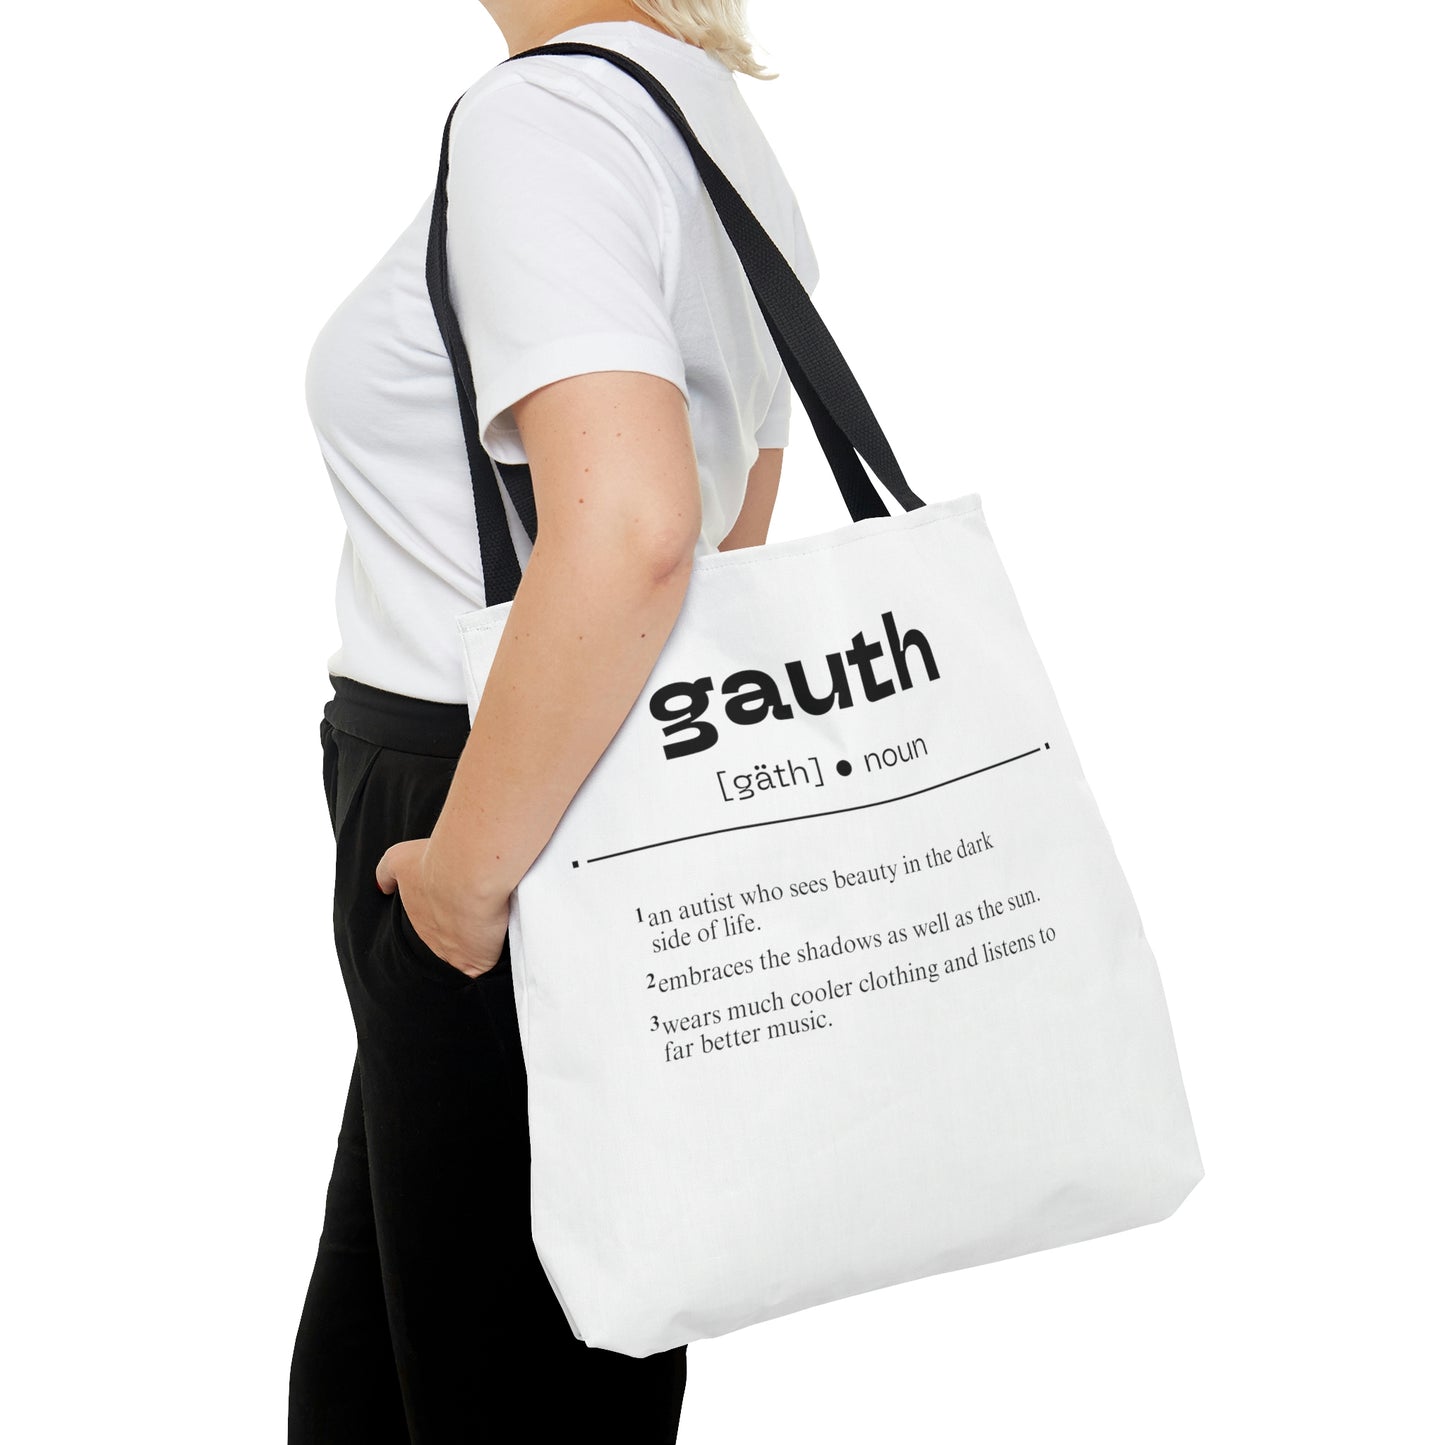 Goth Redefined [Gauthism Line] Tote Bag in 3 sizes